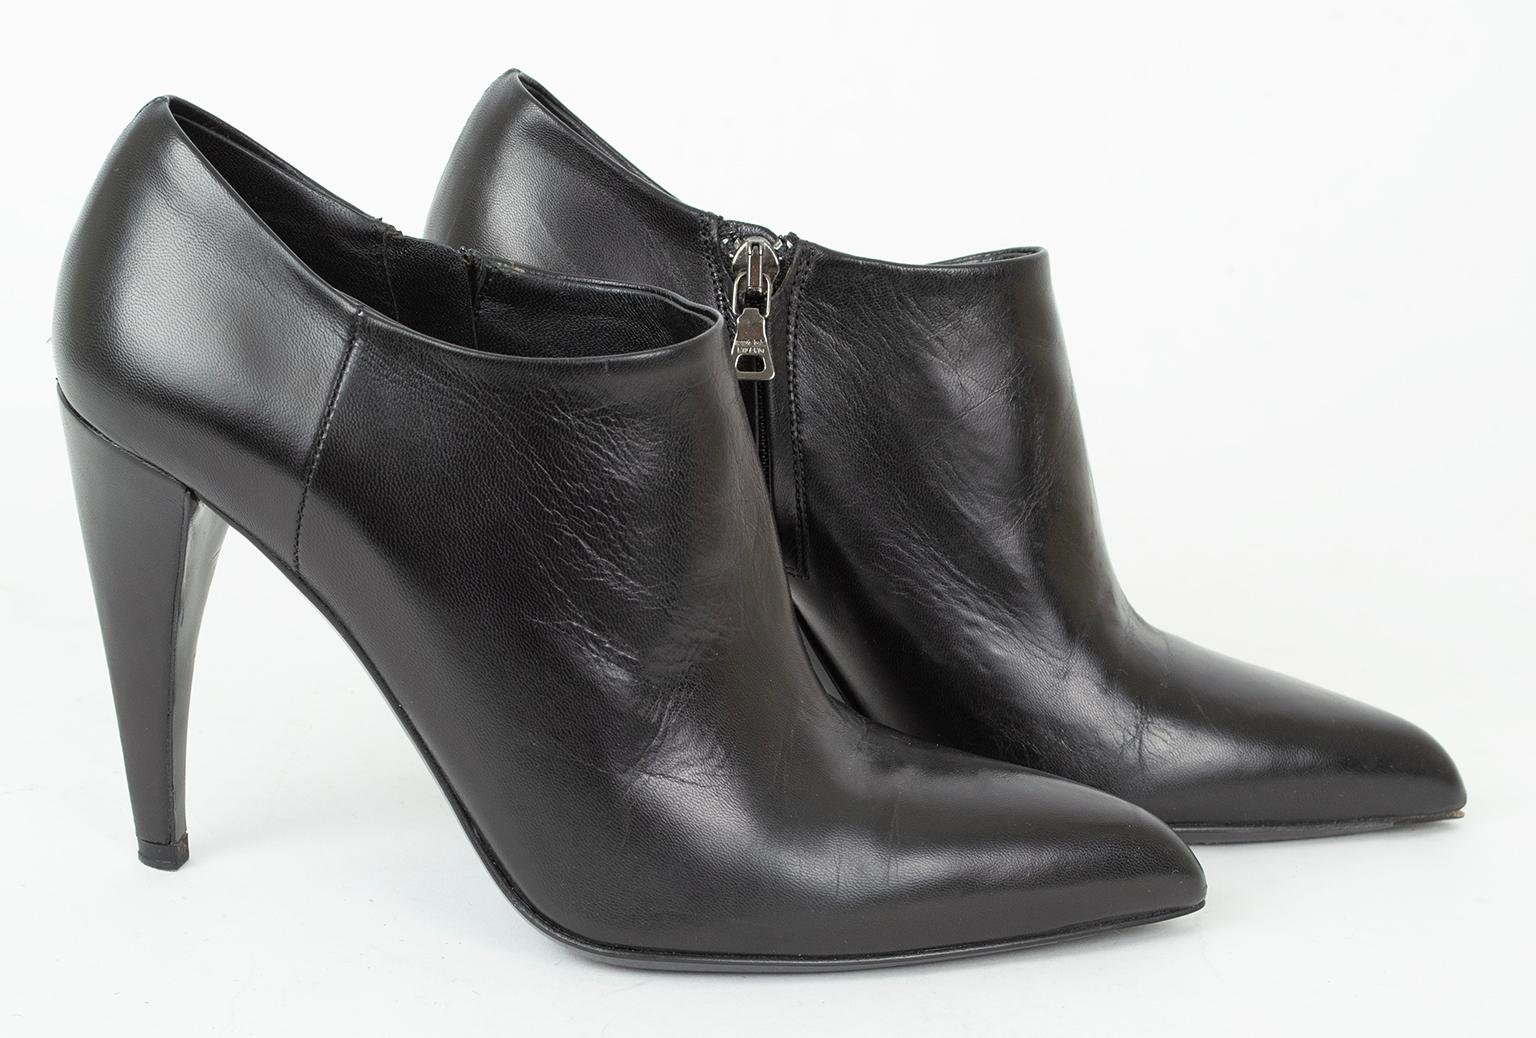 Prada Black Leather Side Zip Ankle Bootie with 4” Lobster Claw Heel – 38, 2001 In Good Condition For Sale In Tucson, AZ